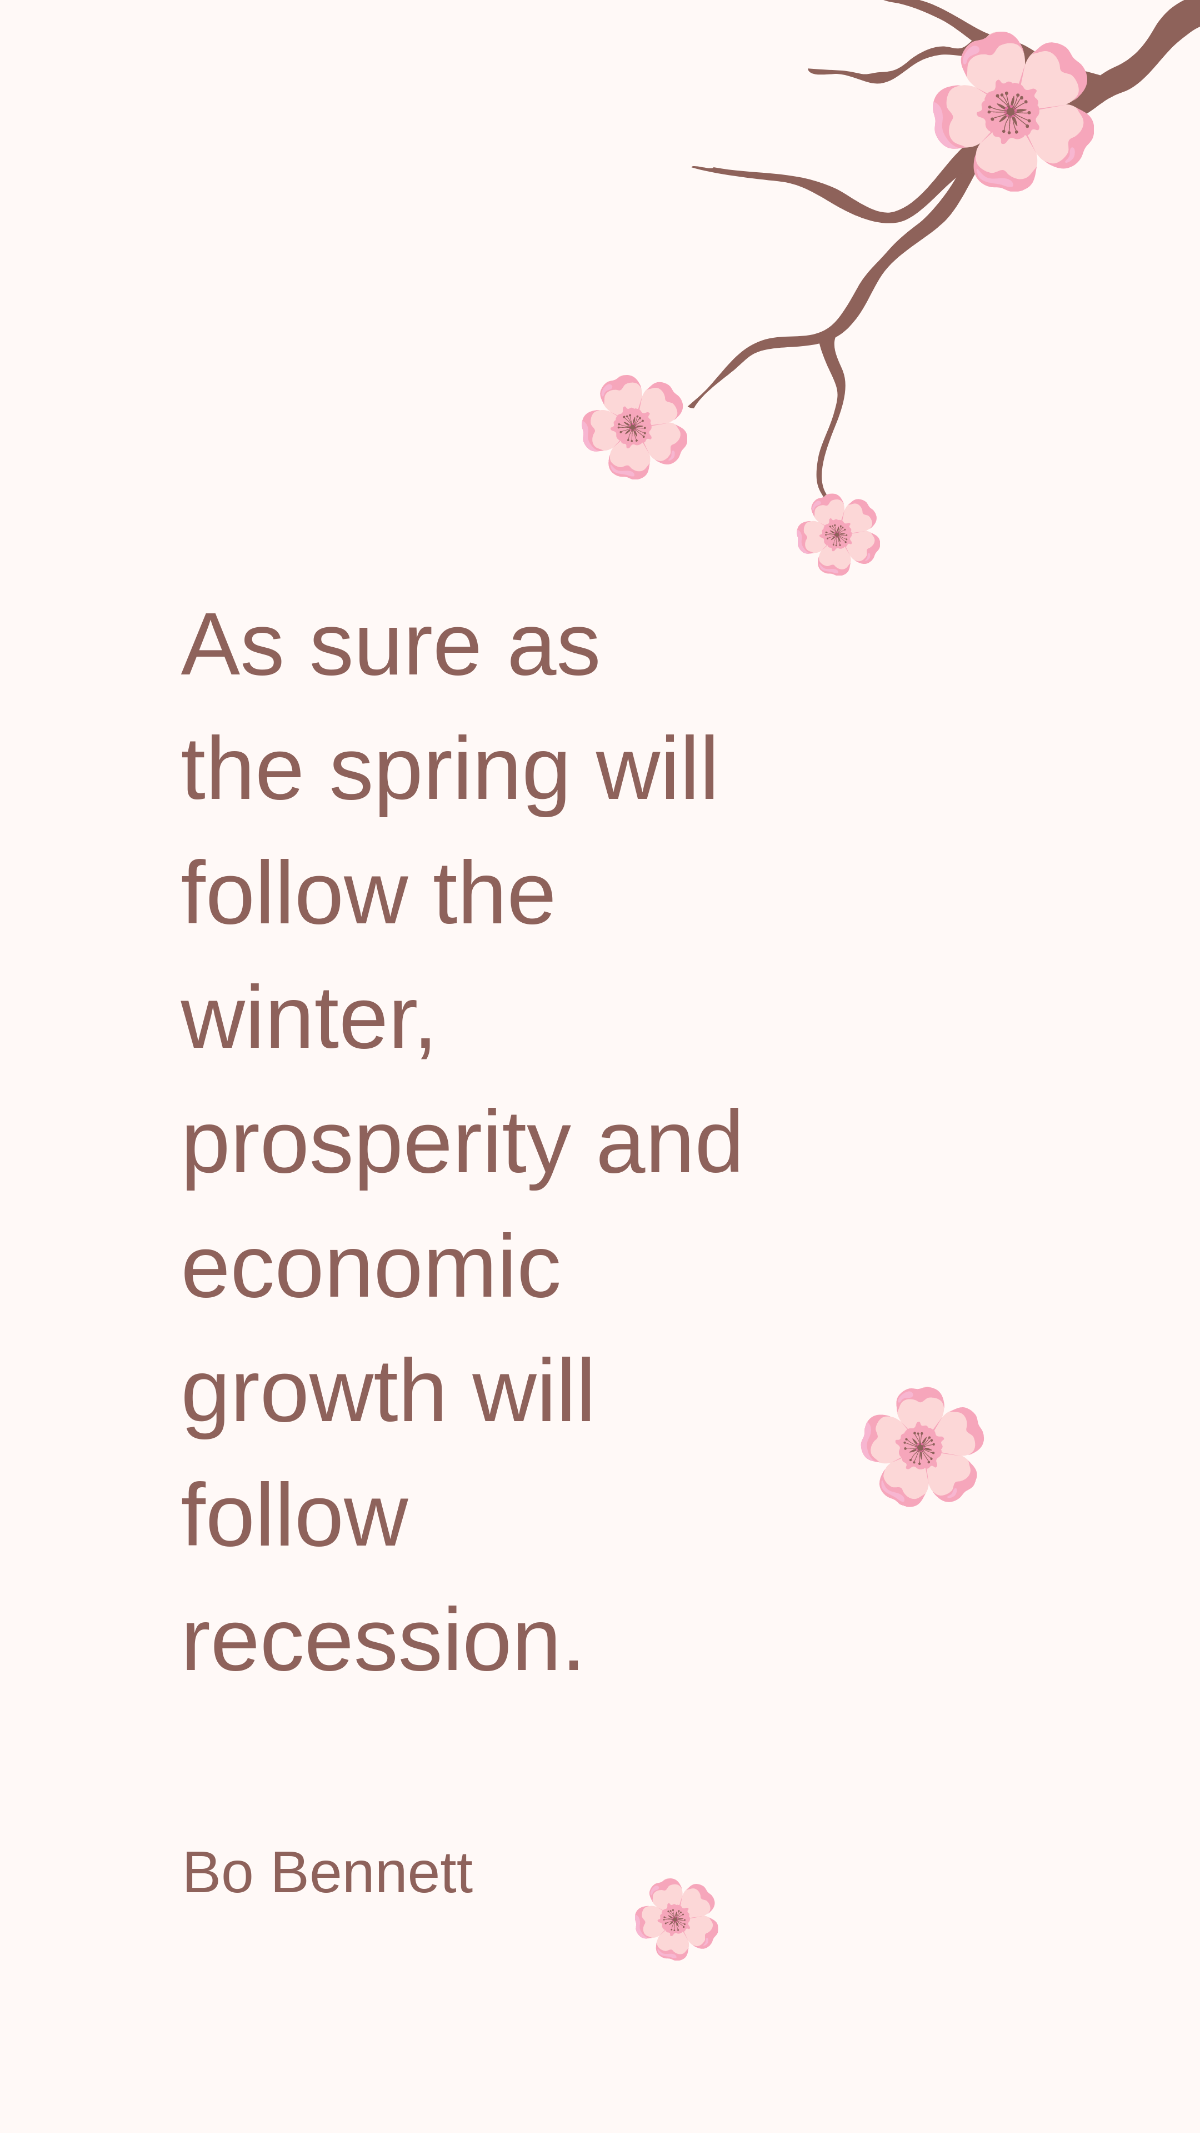 Free  Bo Bennett - As sure as the spring will follow the winter, prosperity and economic growth will follow recession. Template